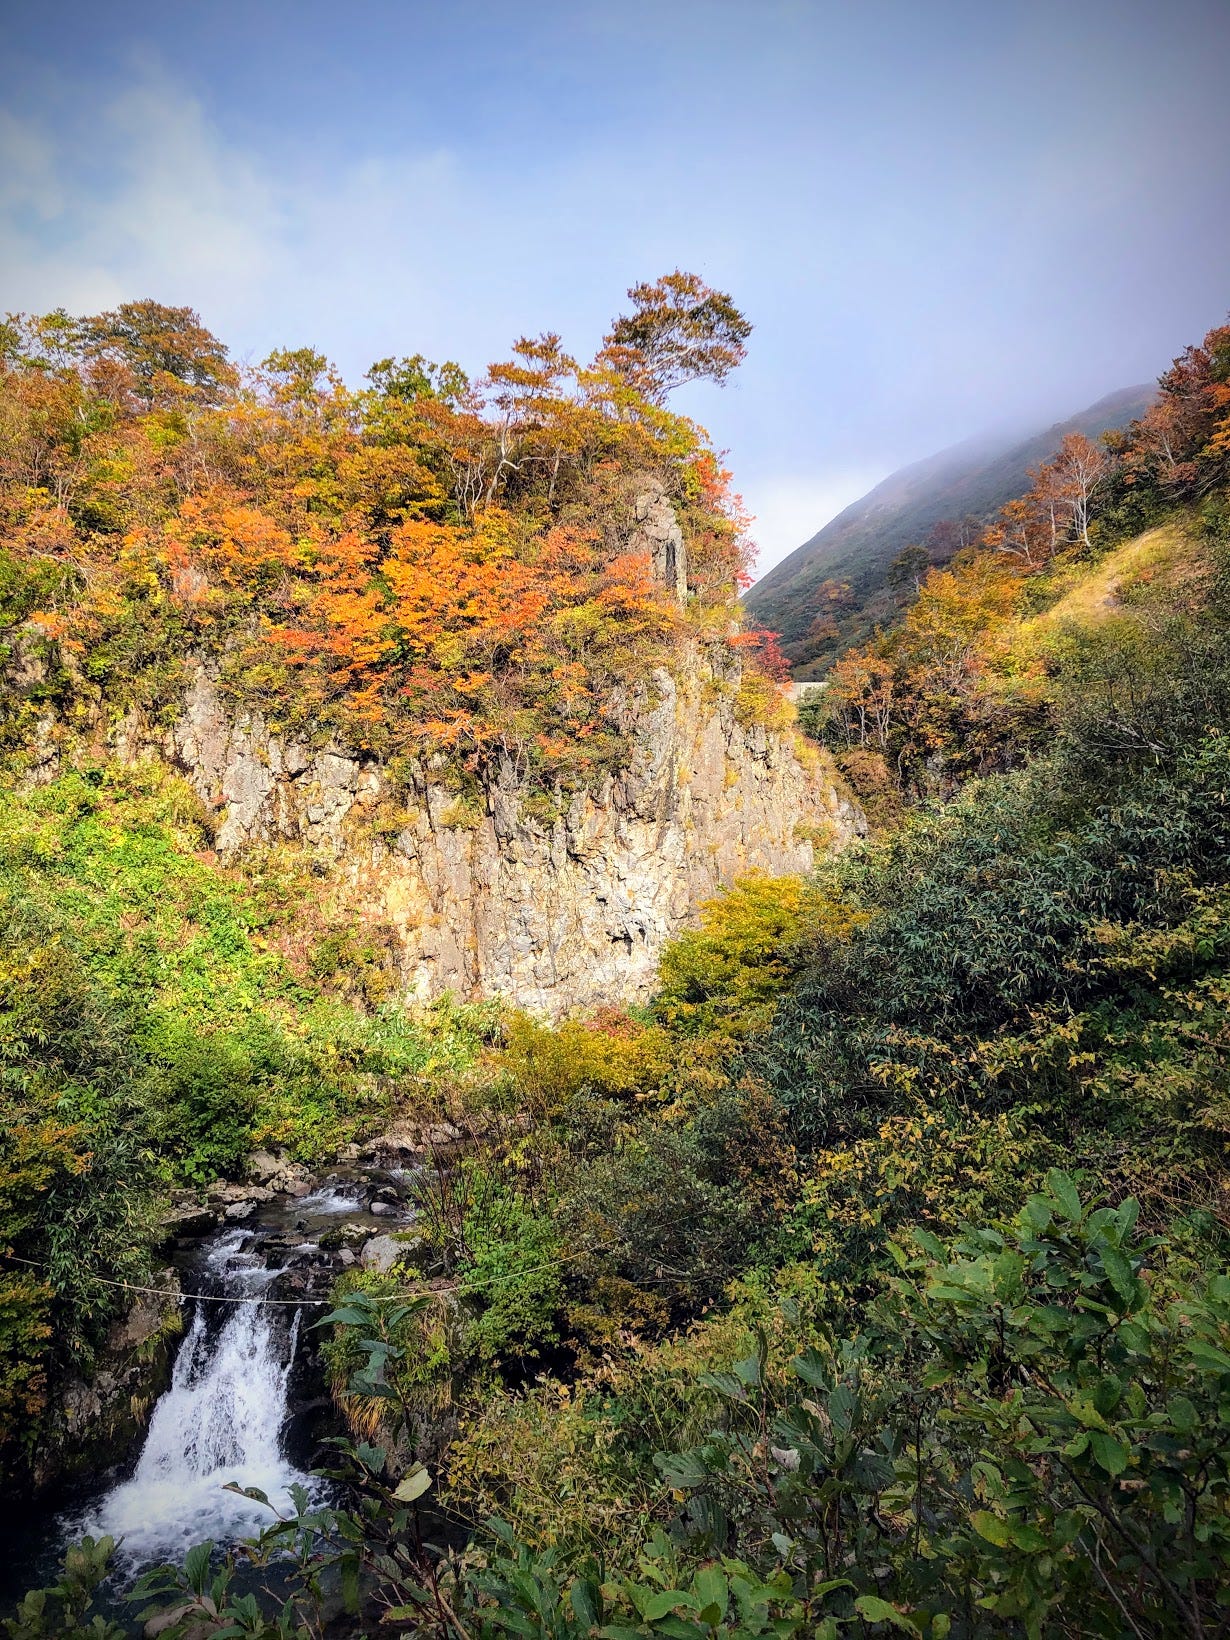 A river carves its way around a tall cliff complete with waterfall that is used for yamabushi waterfall meditation training